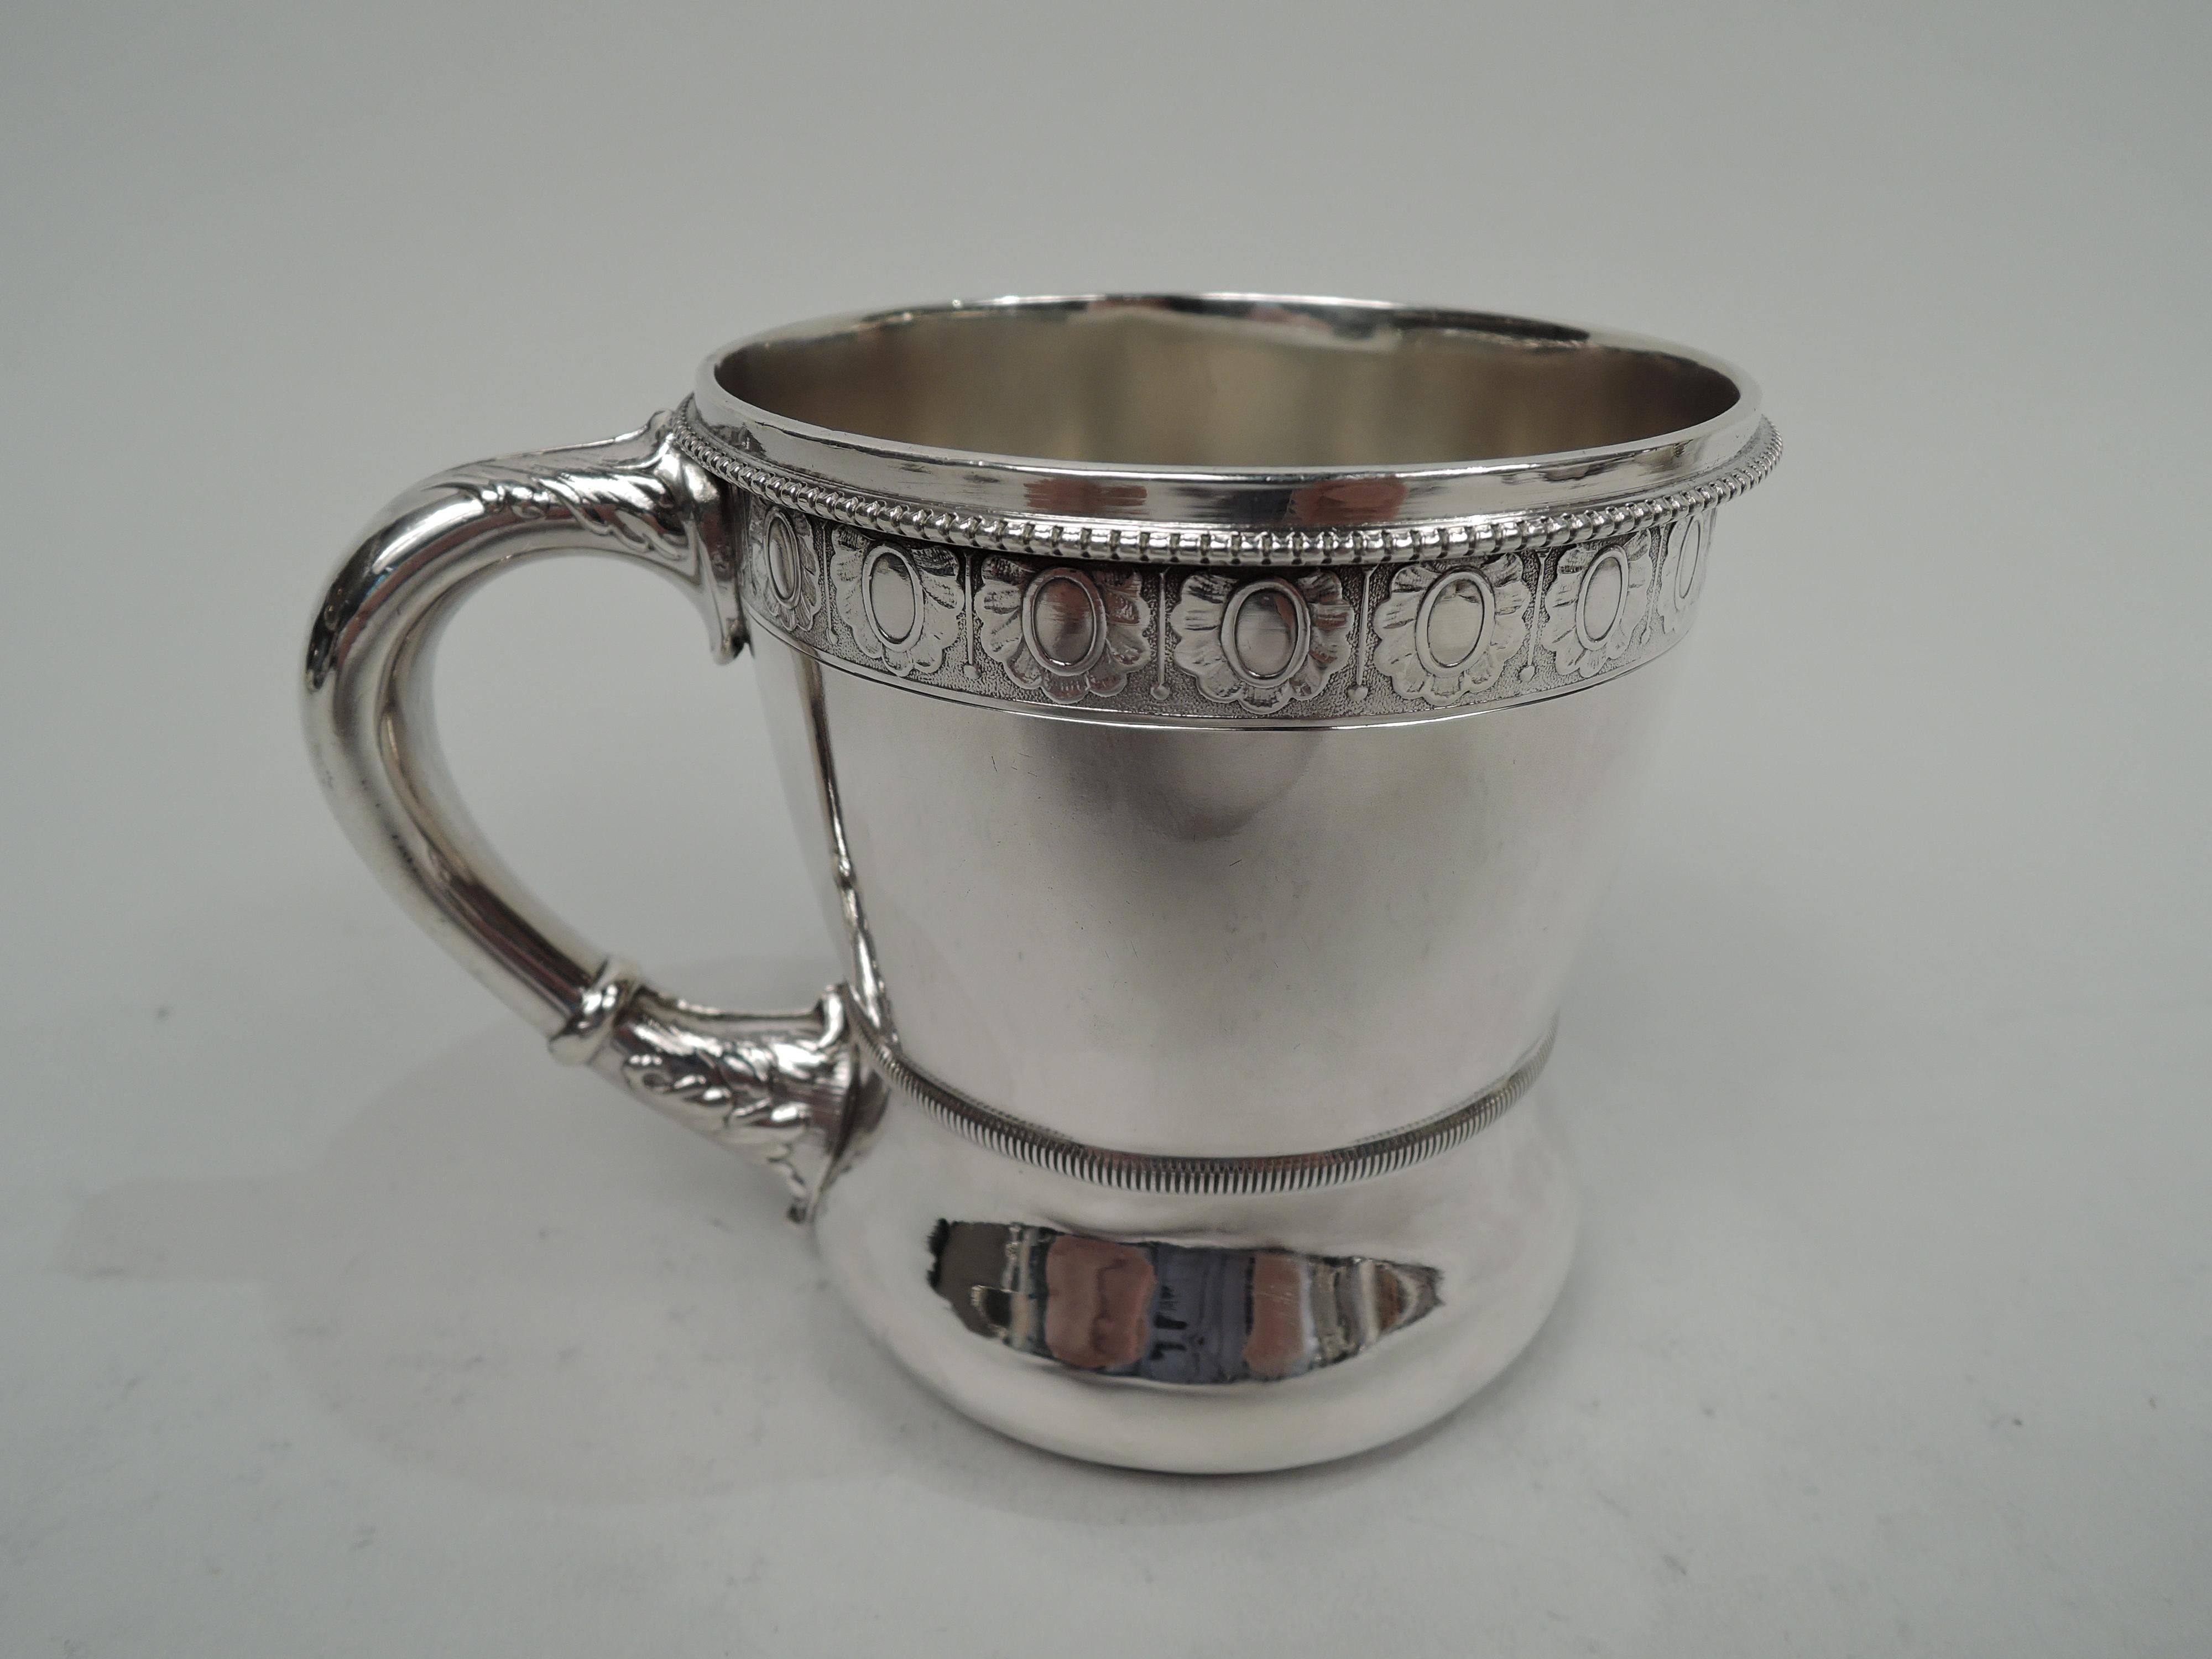 Aesthetic Movement Wood & Hughes New York Aesthetic Classical Sterling Silver Baby Cup